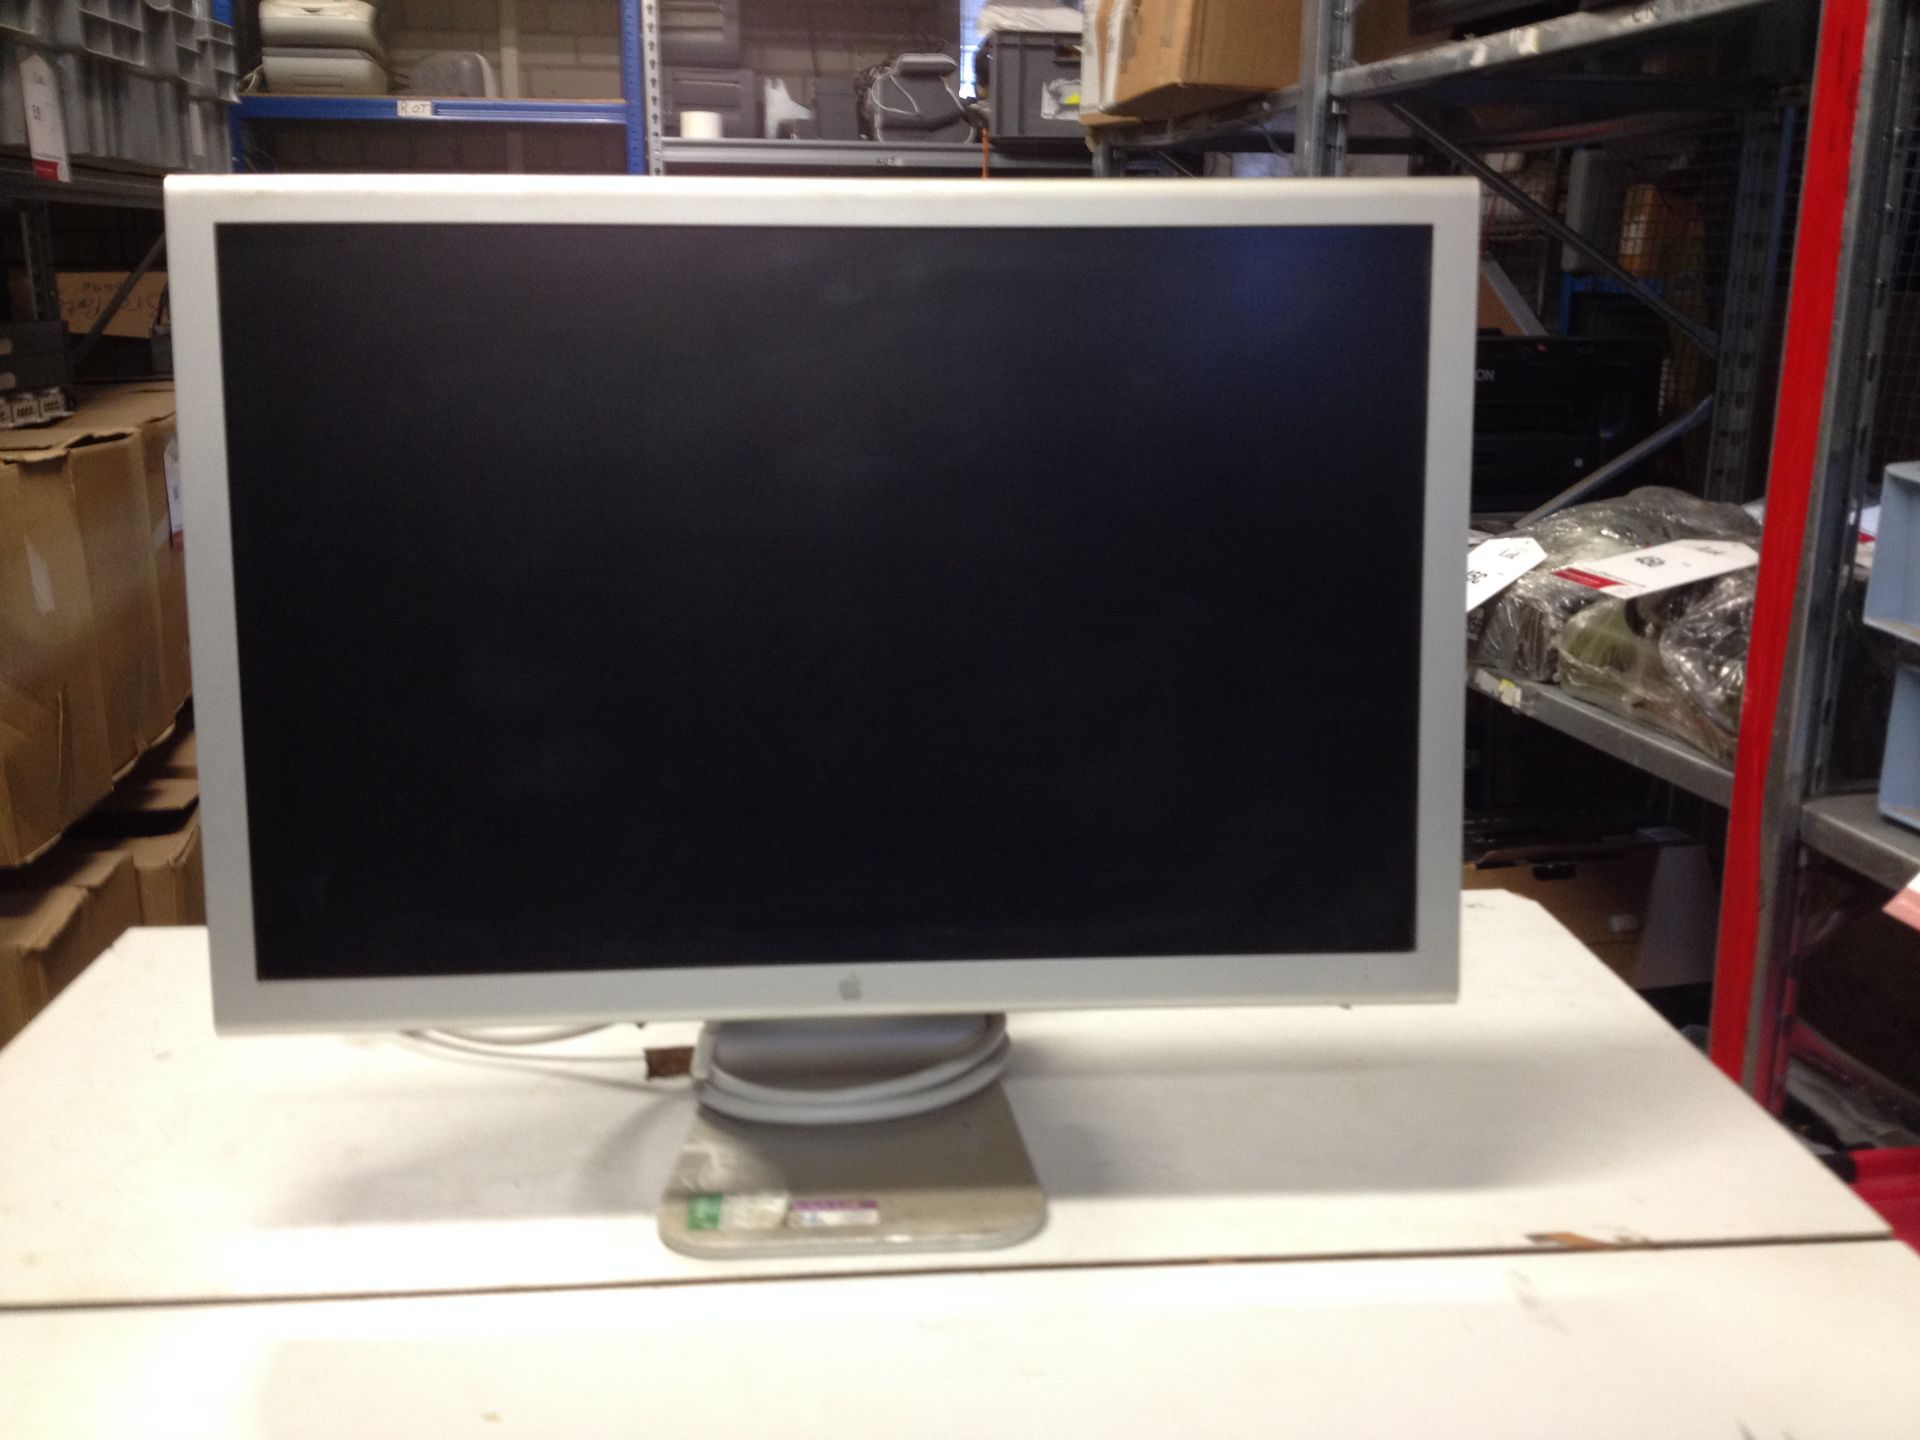 Apple Cinema Display 23" Widescreen Monitor w/ Mouse